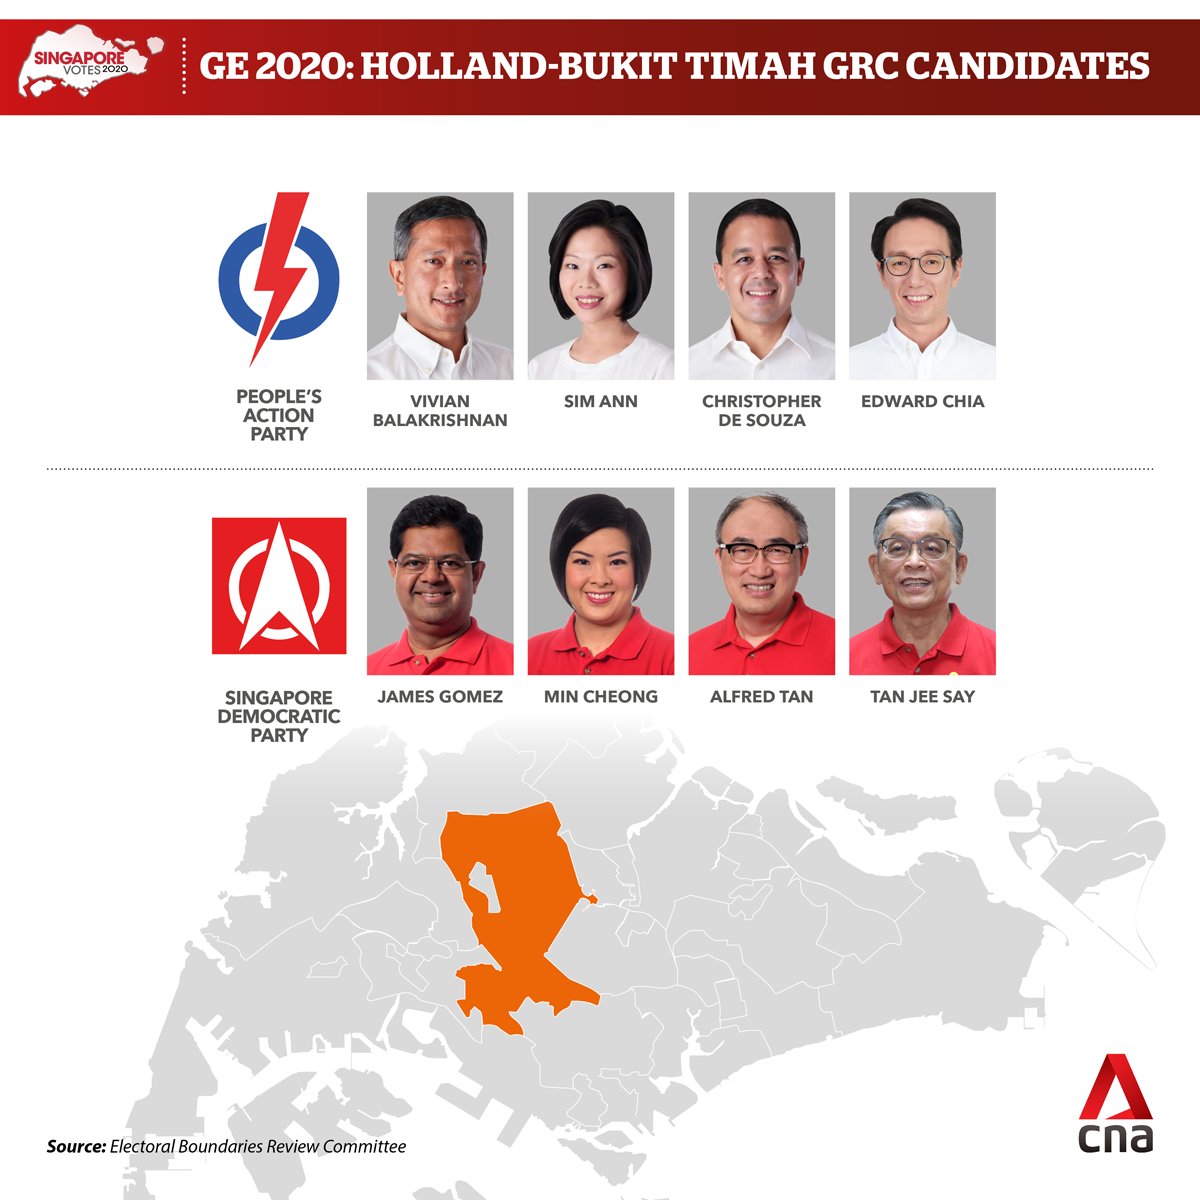  #GE2020  : The PAP team led by Vivian Balakrishnan will face off with an SDP team for Holland-Bukit Timah GRC  https://cna.asia/2YI9eGQ 